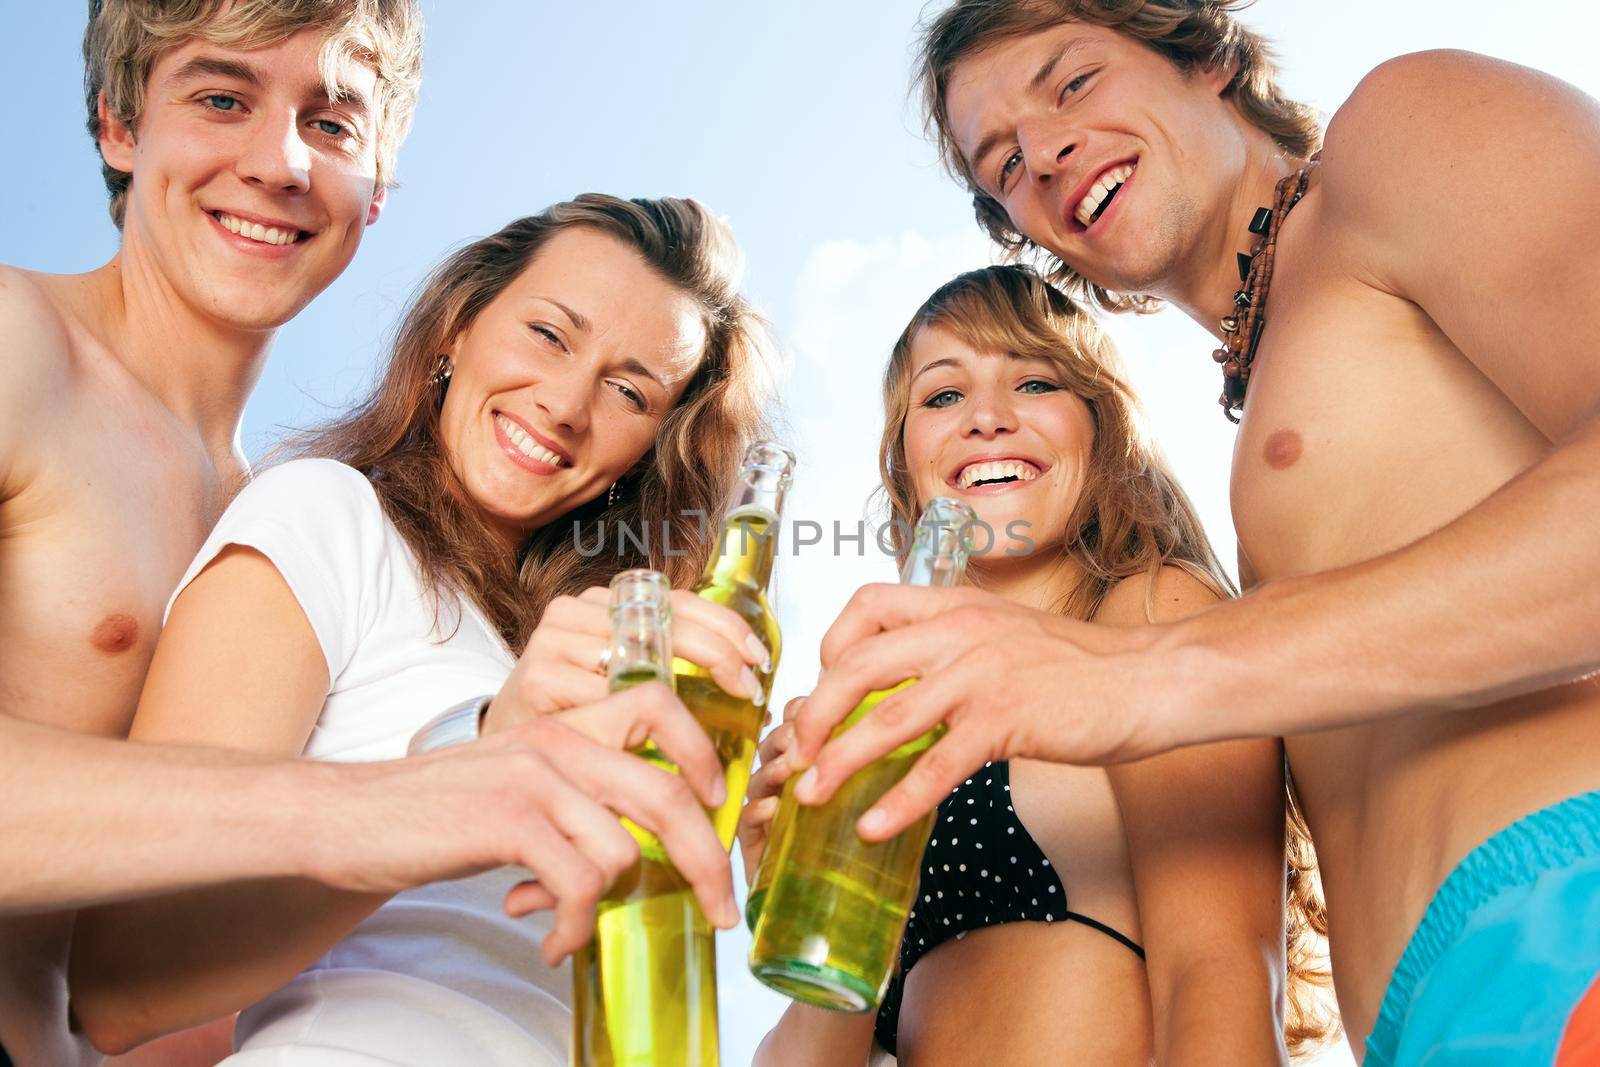 Group of four very beautiful people celebrating hot party on the beach in the summer of their lives - focus on faces